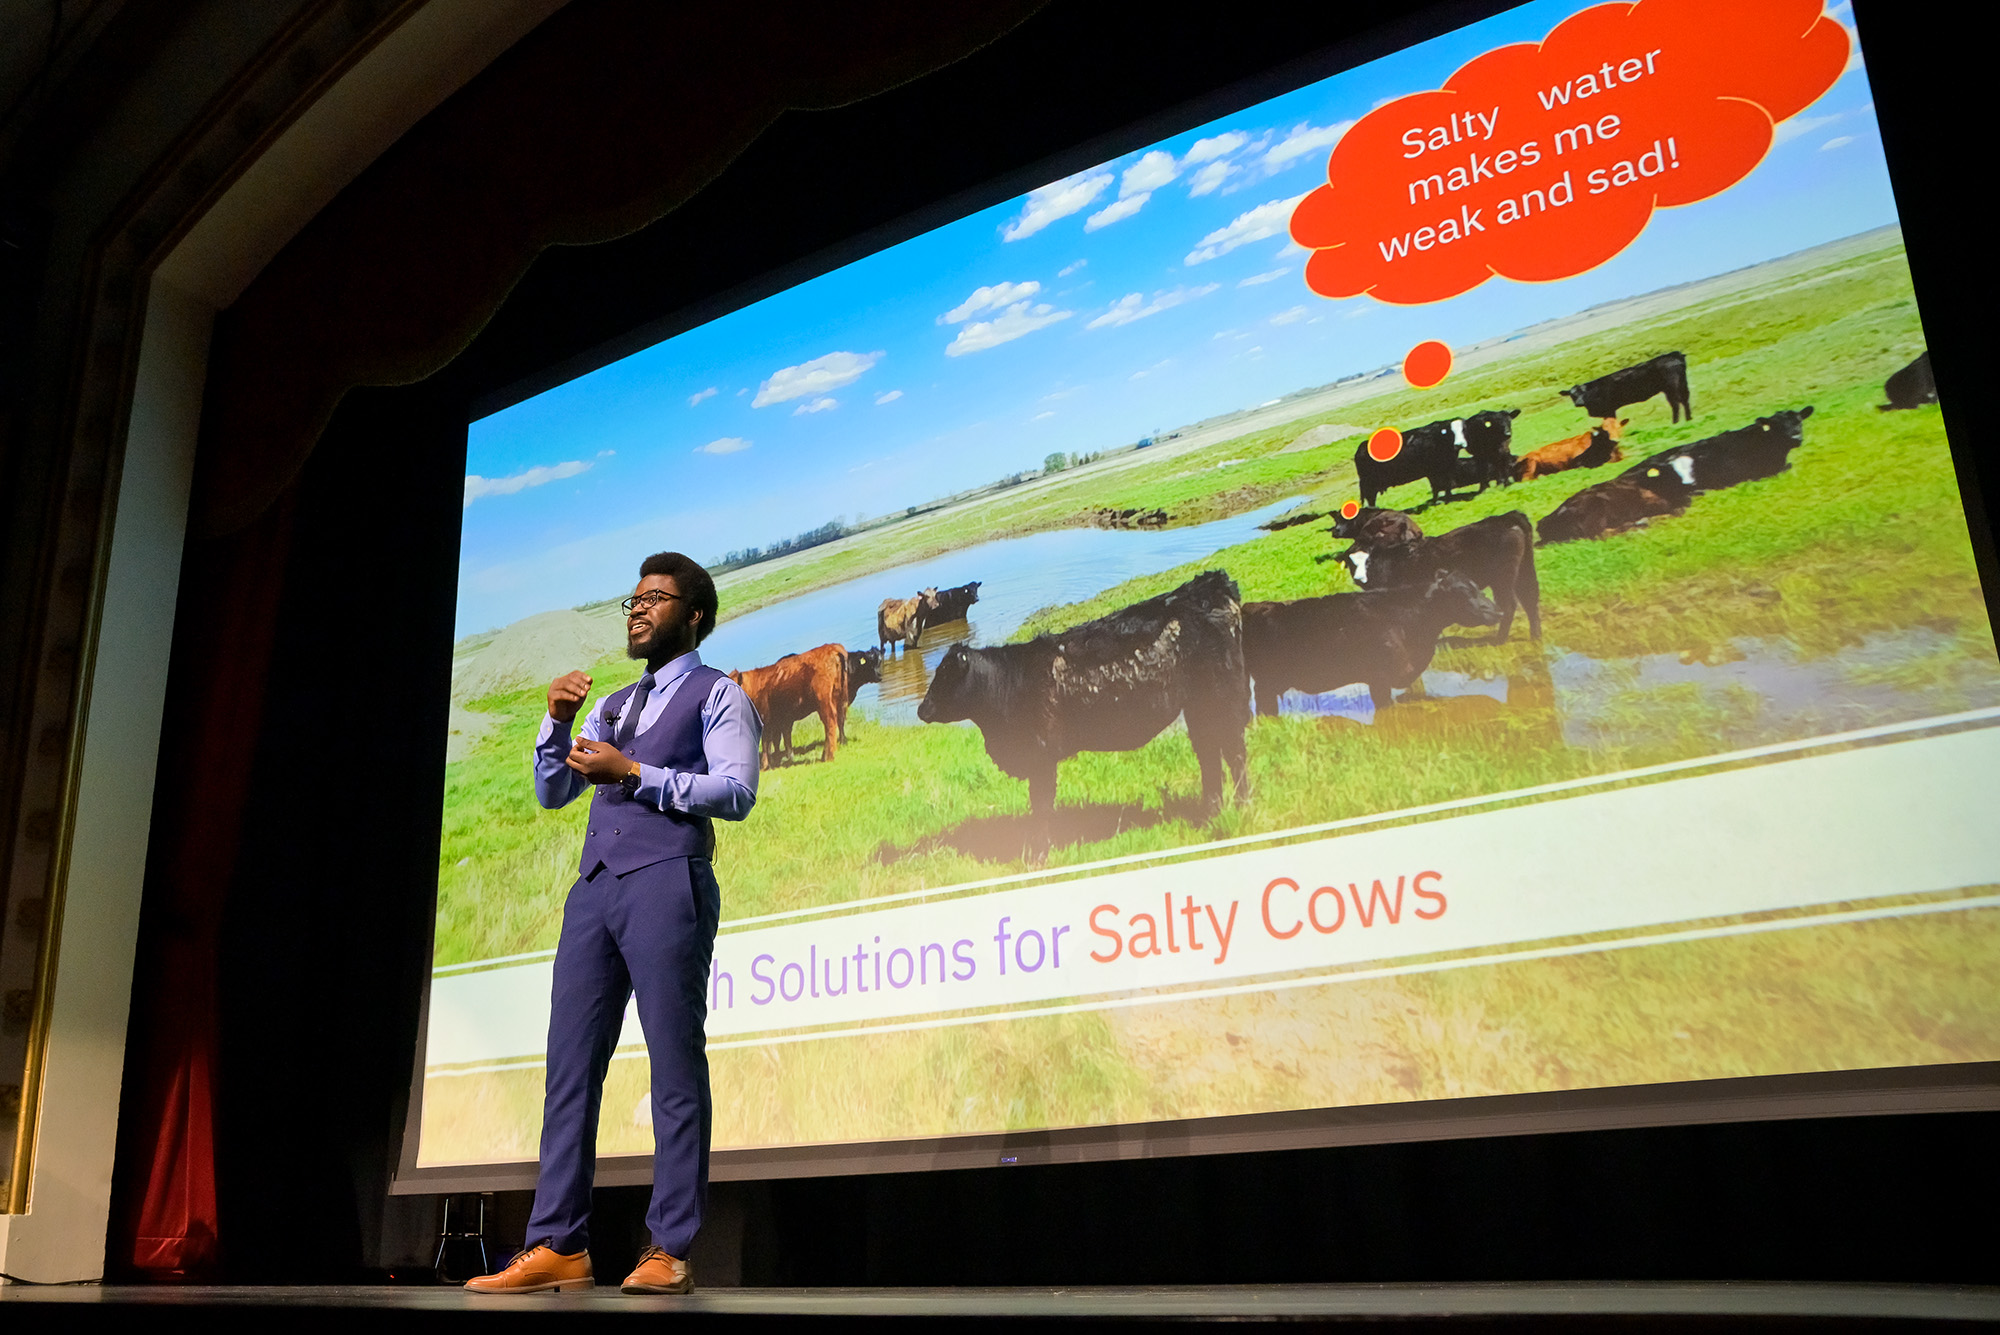 Michael Mensah presenting his 3MT, Fresh Solutions for Salty Cows. (Photo by Trevor Hopkin)